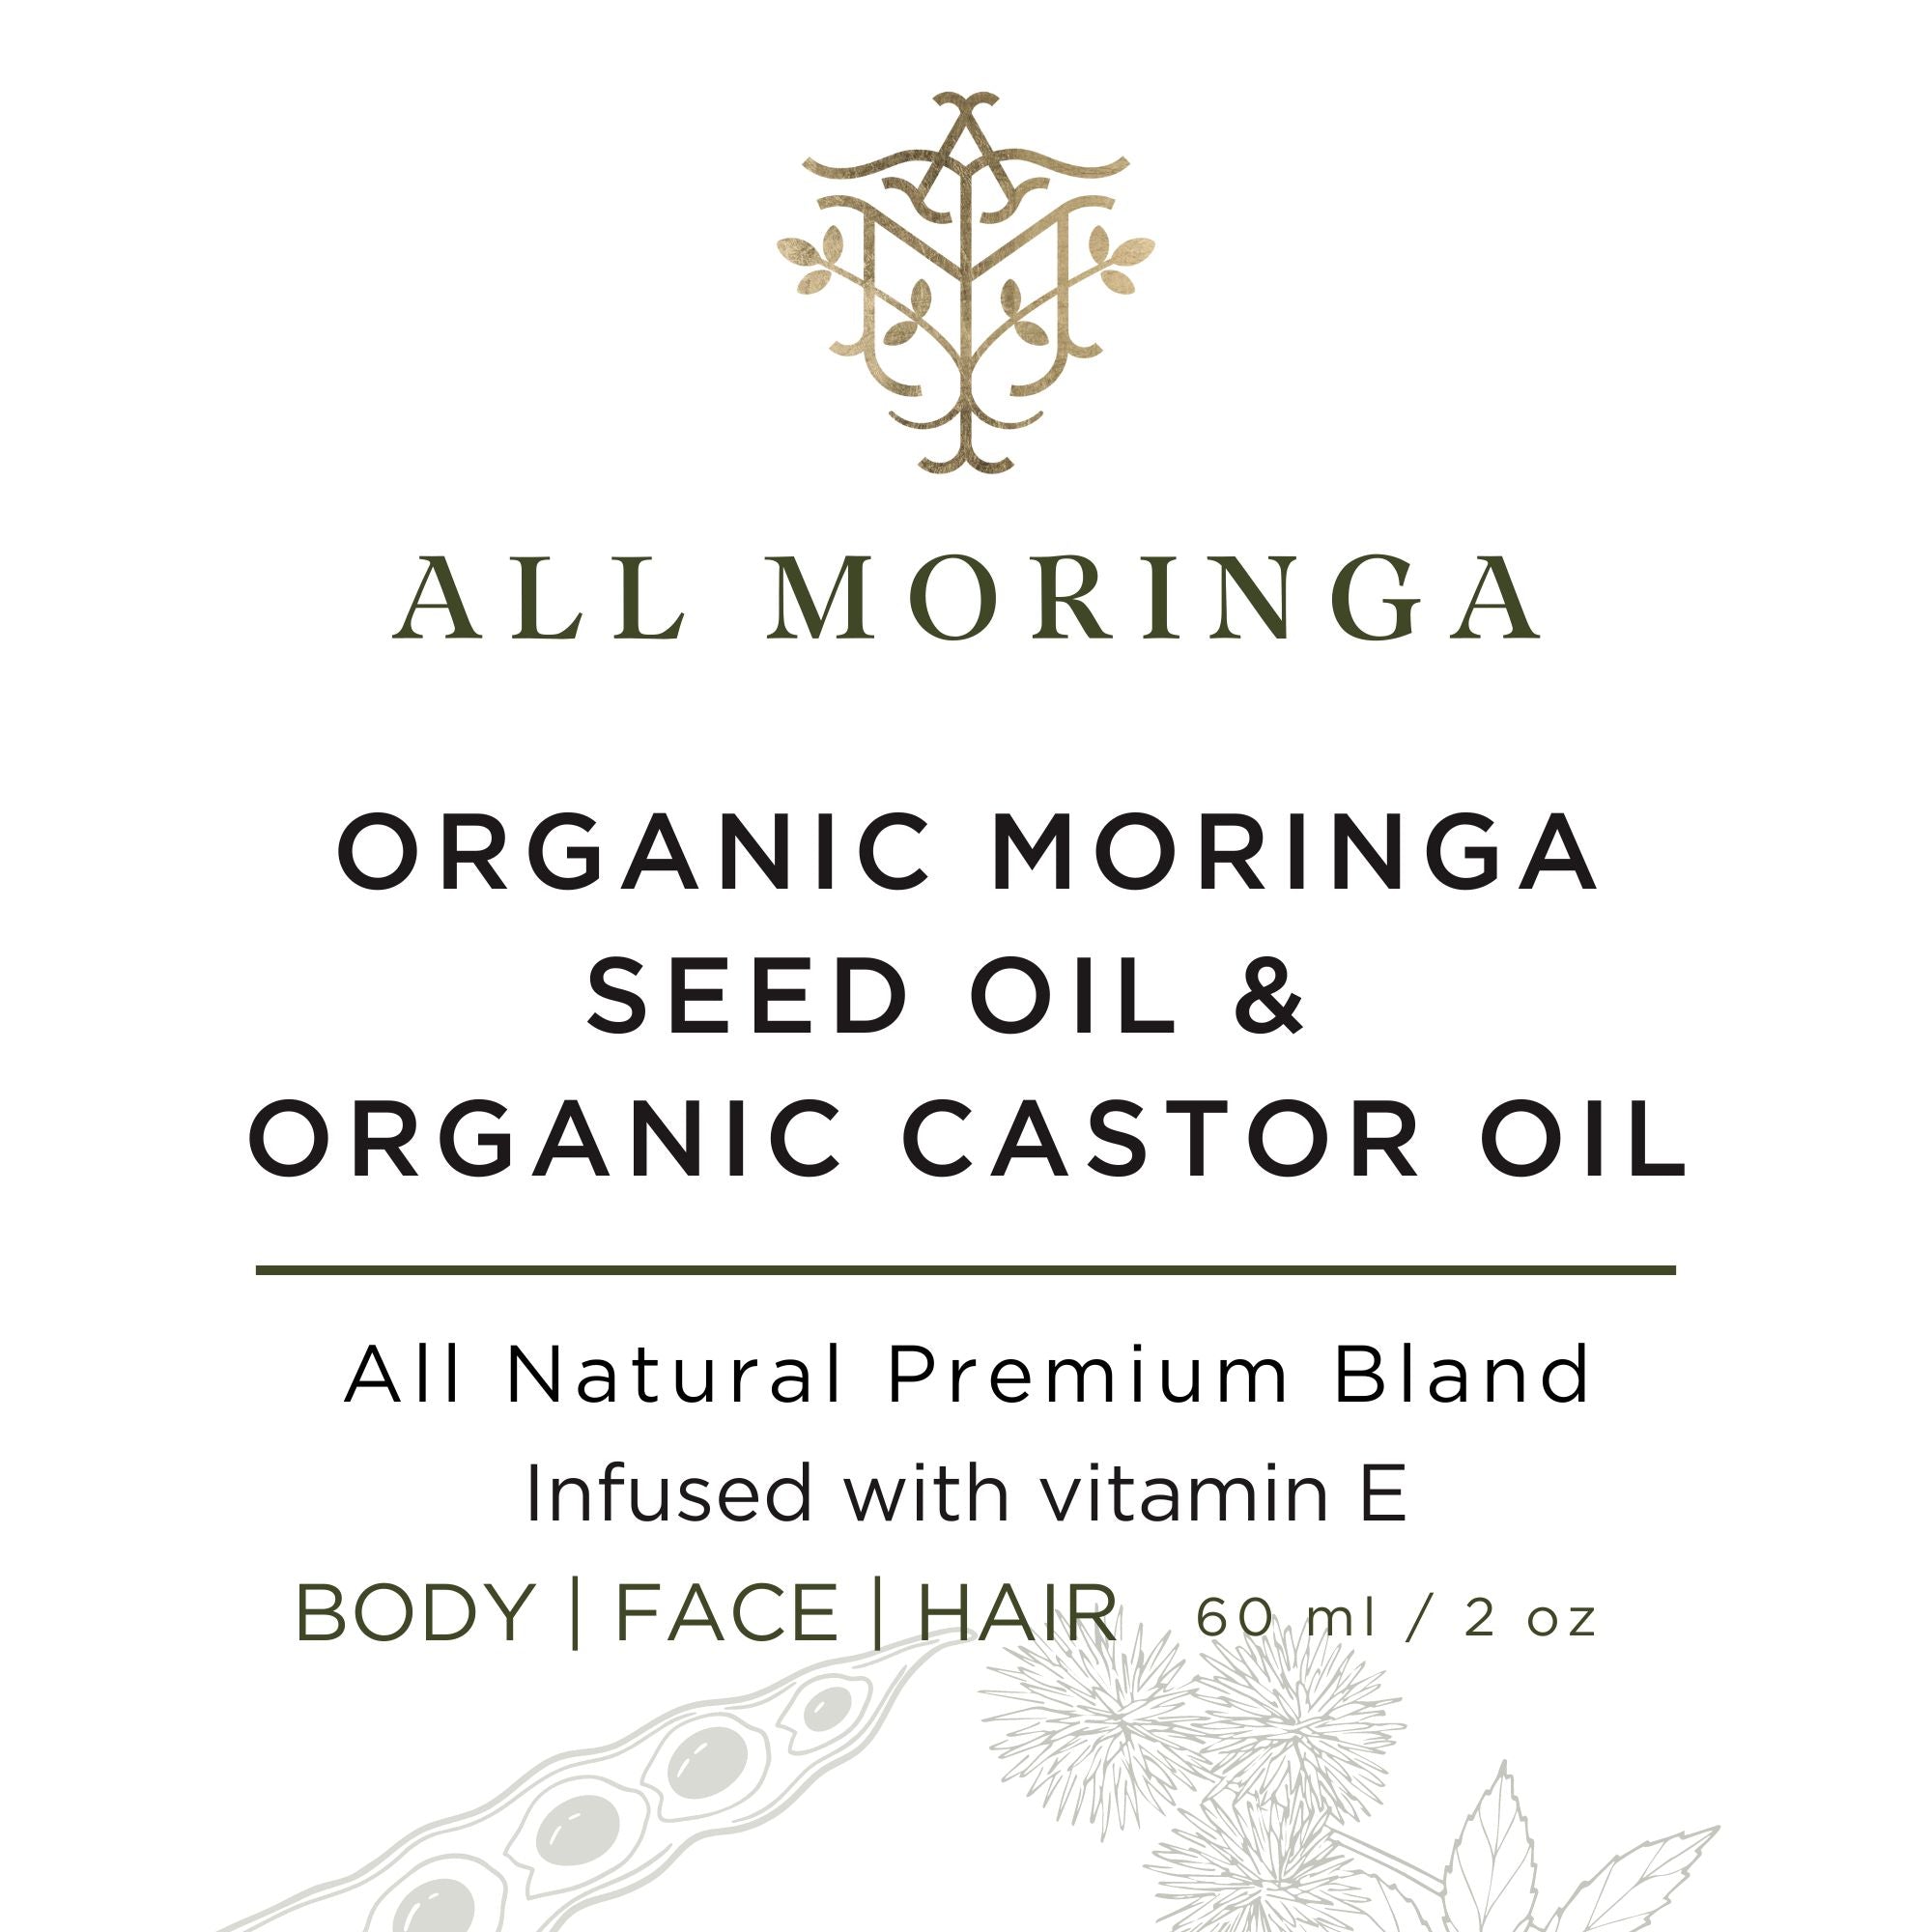 Premium Cold Pressed Blend Organic Moringa & Castor Revival Oil 1:1 with Vitamin E for Face, Body and Hair 2 oz